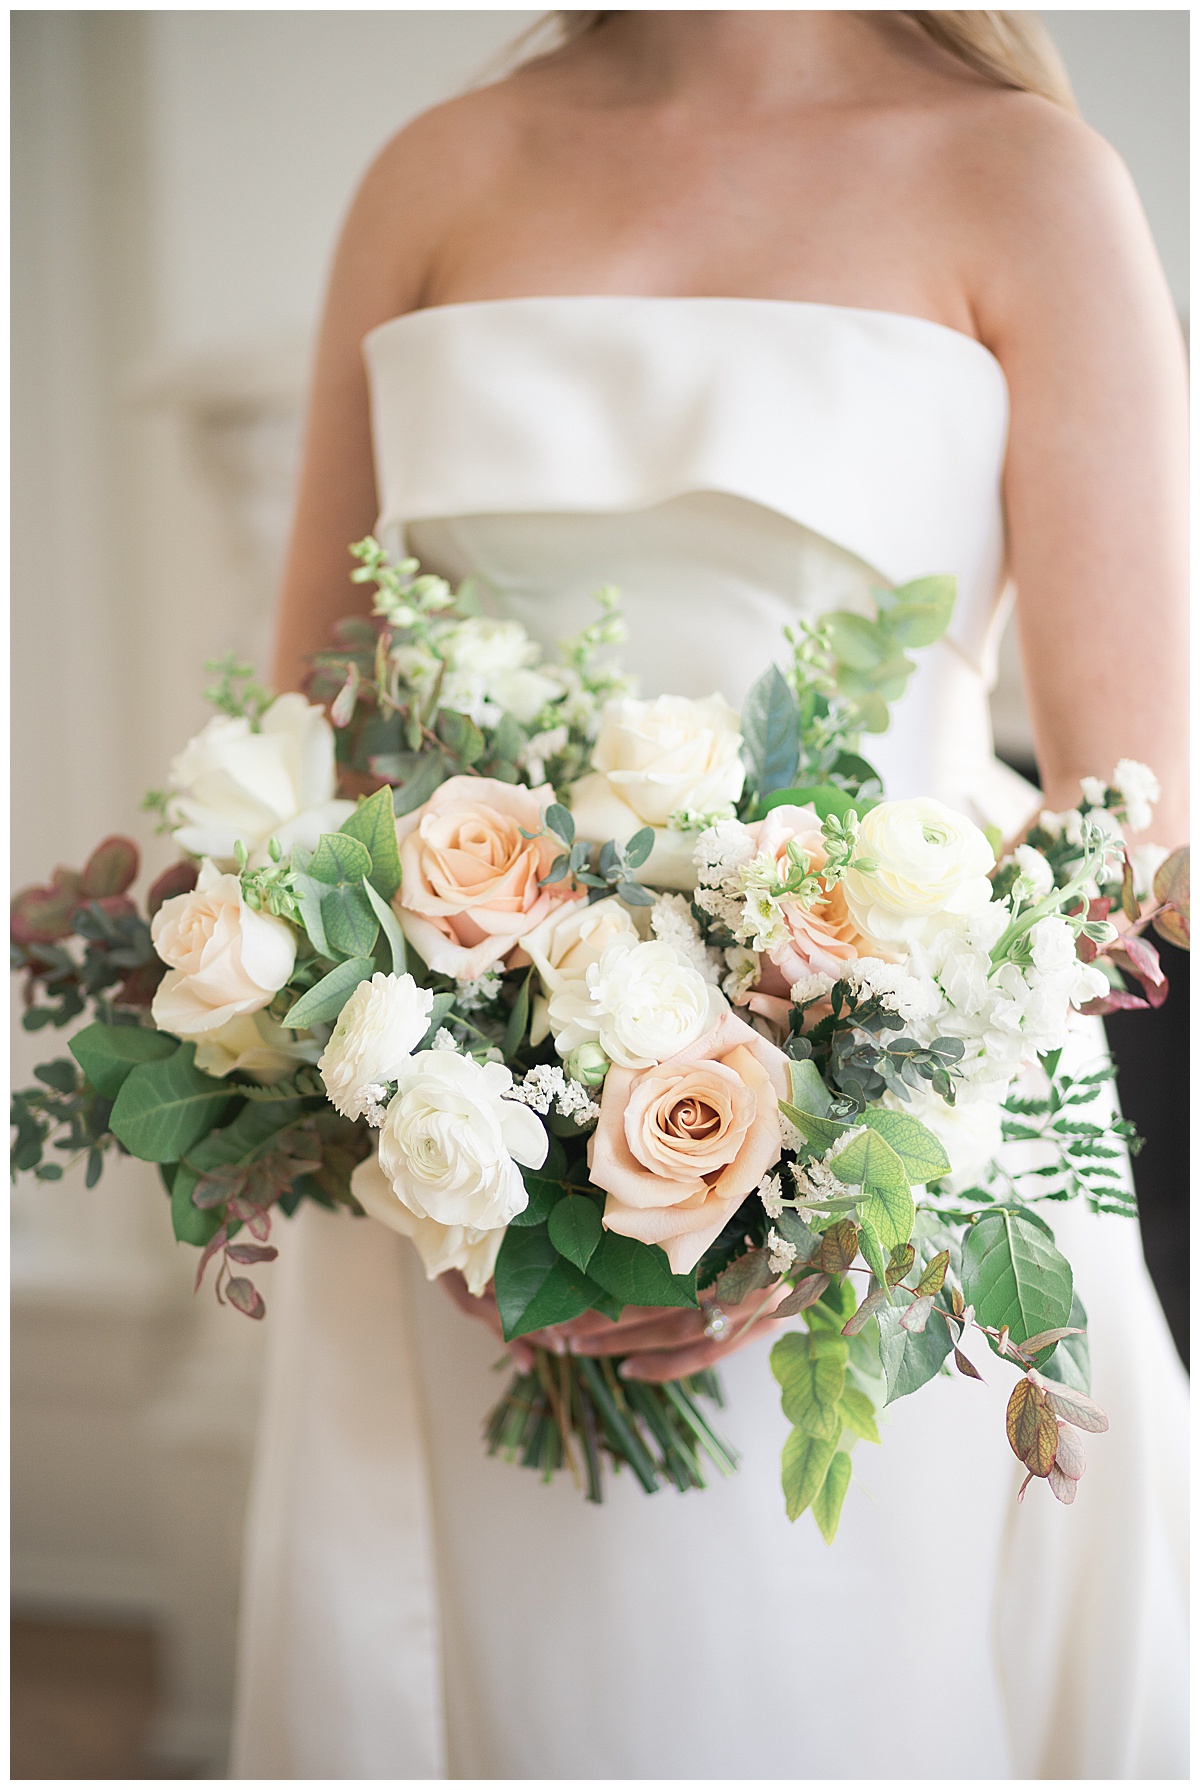 Stunning bouquet with pink tones for Stunning Bridal Portraits at The Creative Chateau